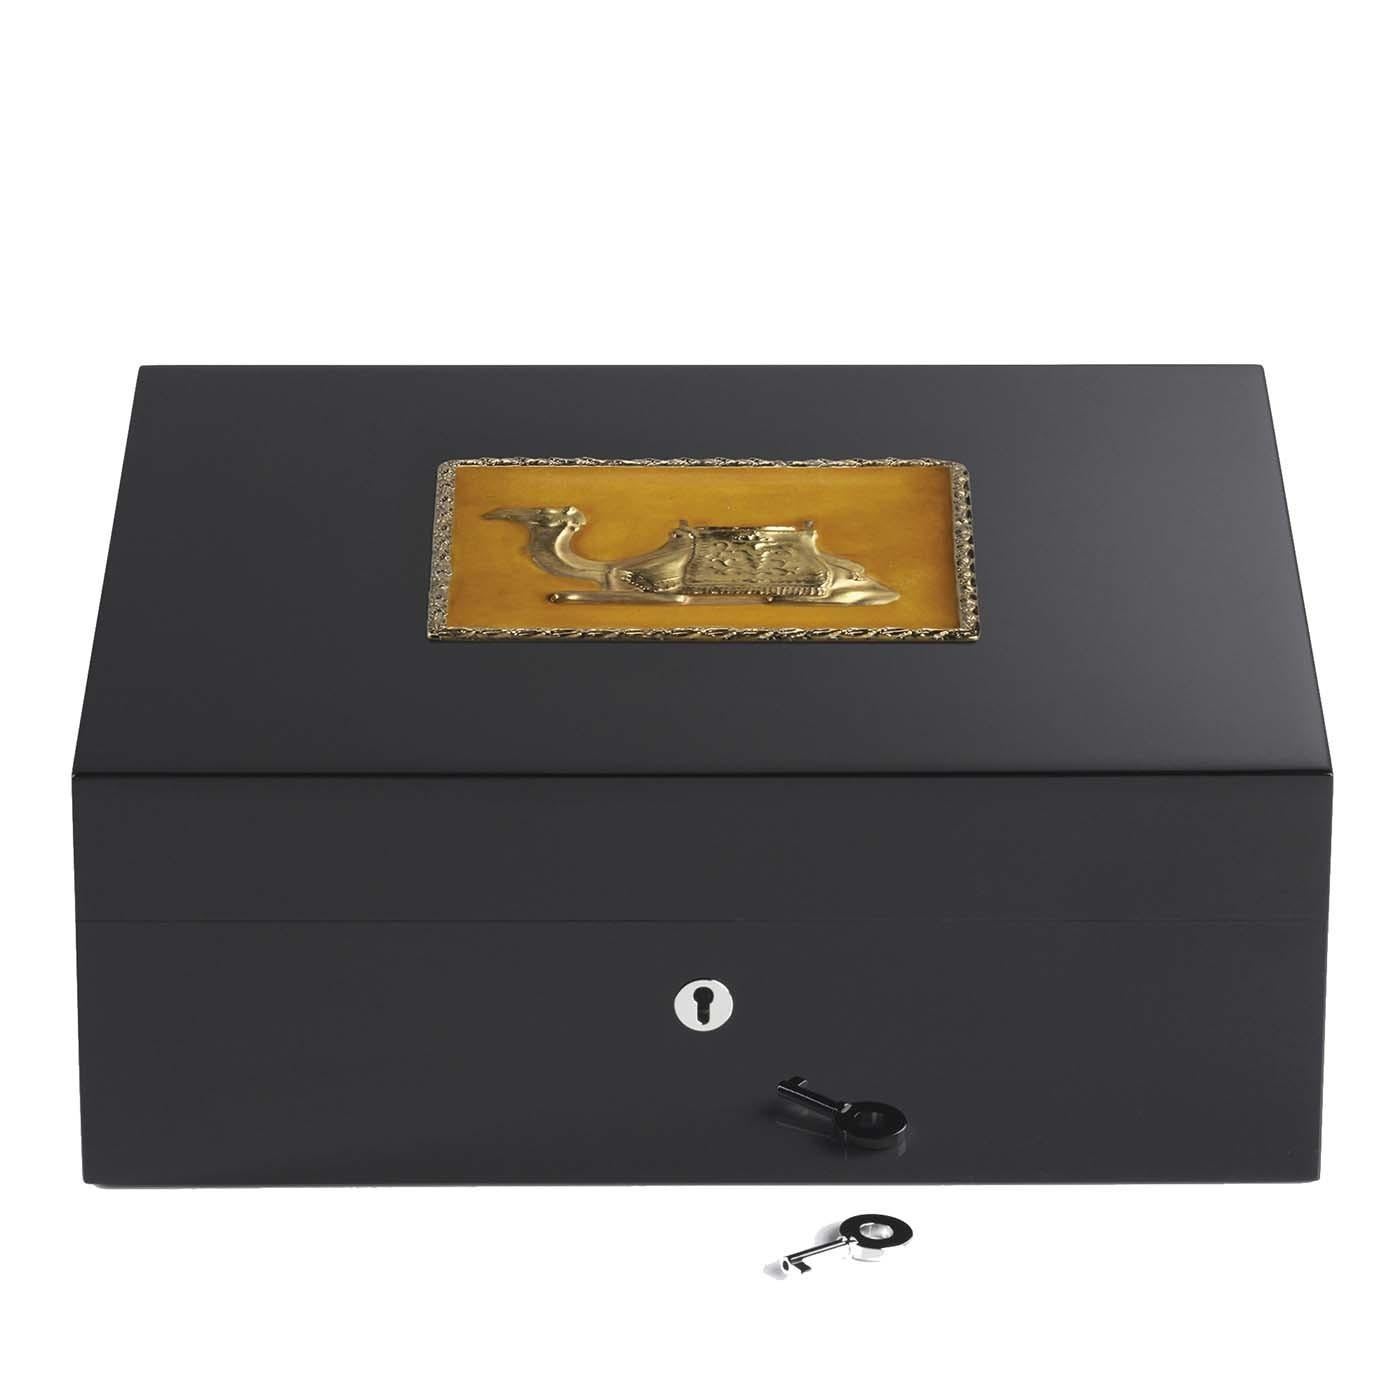 This stunning wooden humidor boasts an elegant black Silhouette that can contain up to 75 cigars. The detailed reproduction of a camel graces the top of the lid and showcases an ocher-colored background with golden edges that matches the camel's